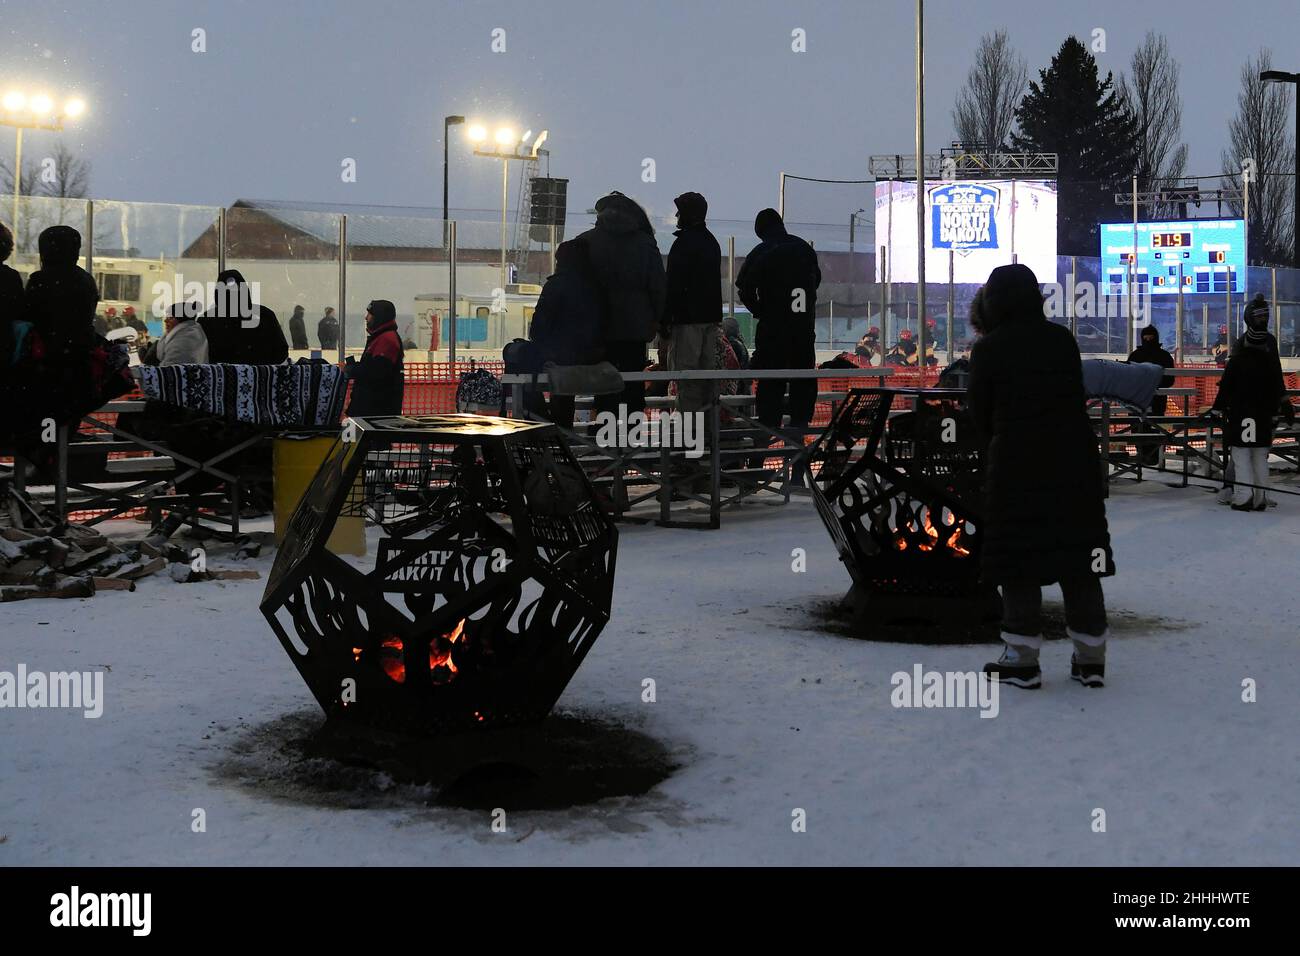 Fans warm up from subzero temperatures around fire pits during the 3rd annual Hockey Day North Dakota outdoor hockey event in Jamestown, ND. Youth, high school and college hockey teams from around North Dakota competed over two days. By Russell Hons/CSM Stock Photo